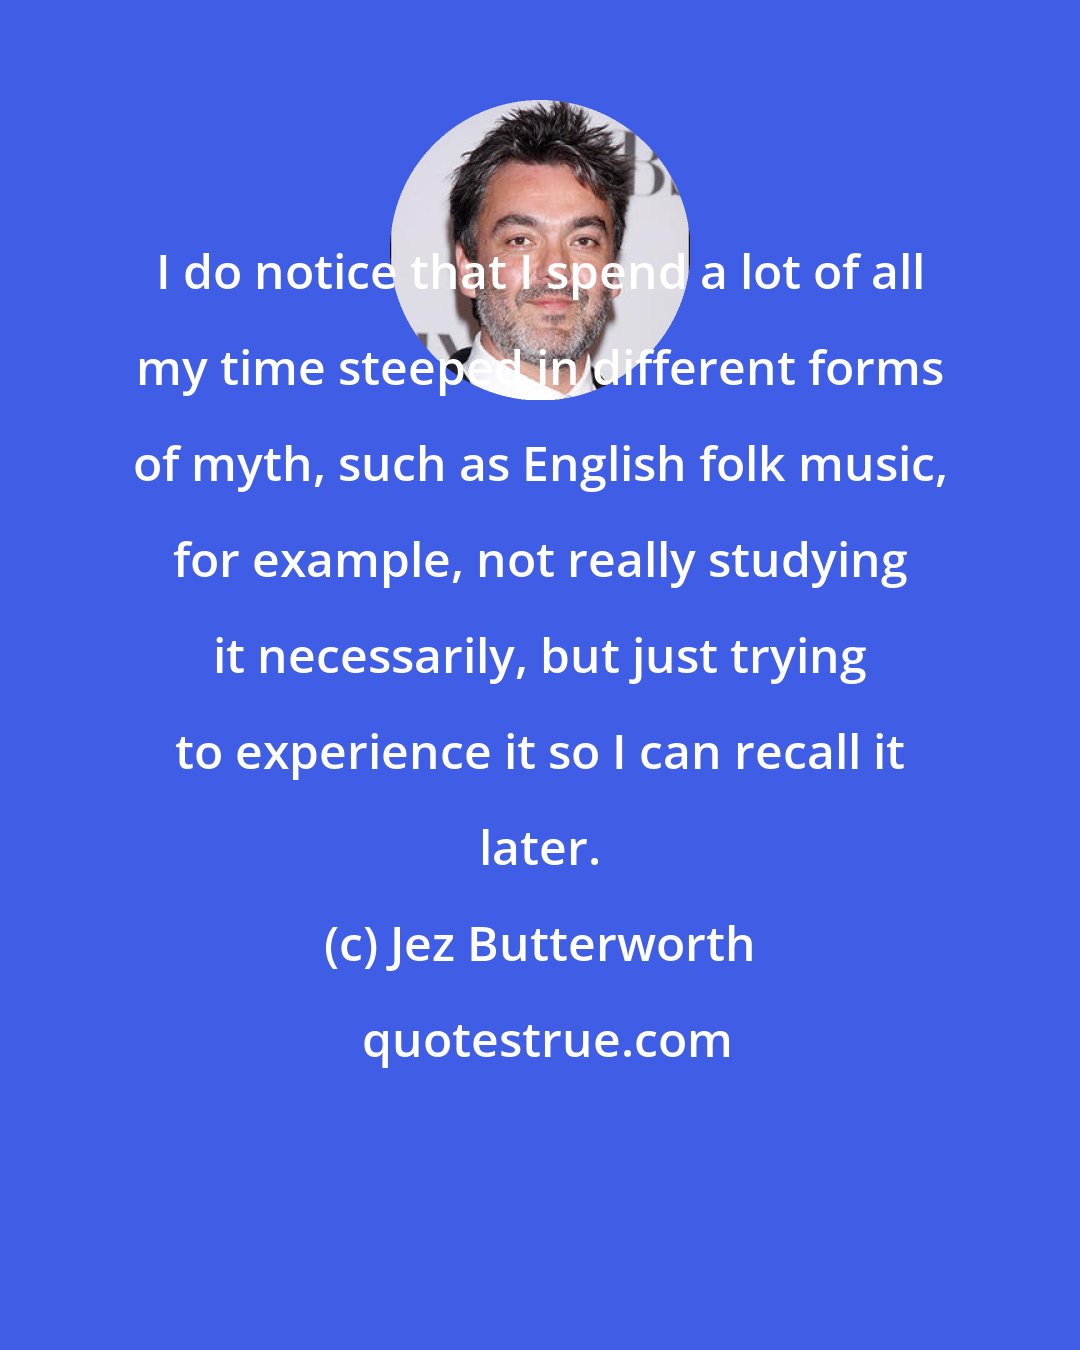 Jez Butterworth: I do notice that I spend a lot of all my time steeped in different forms of myth, such as English folk music, for example, not really studying it necessarily, but just trying to experience it so I can recall it later.